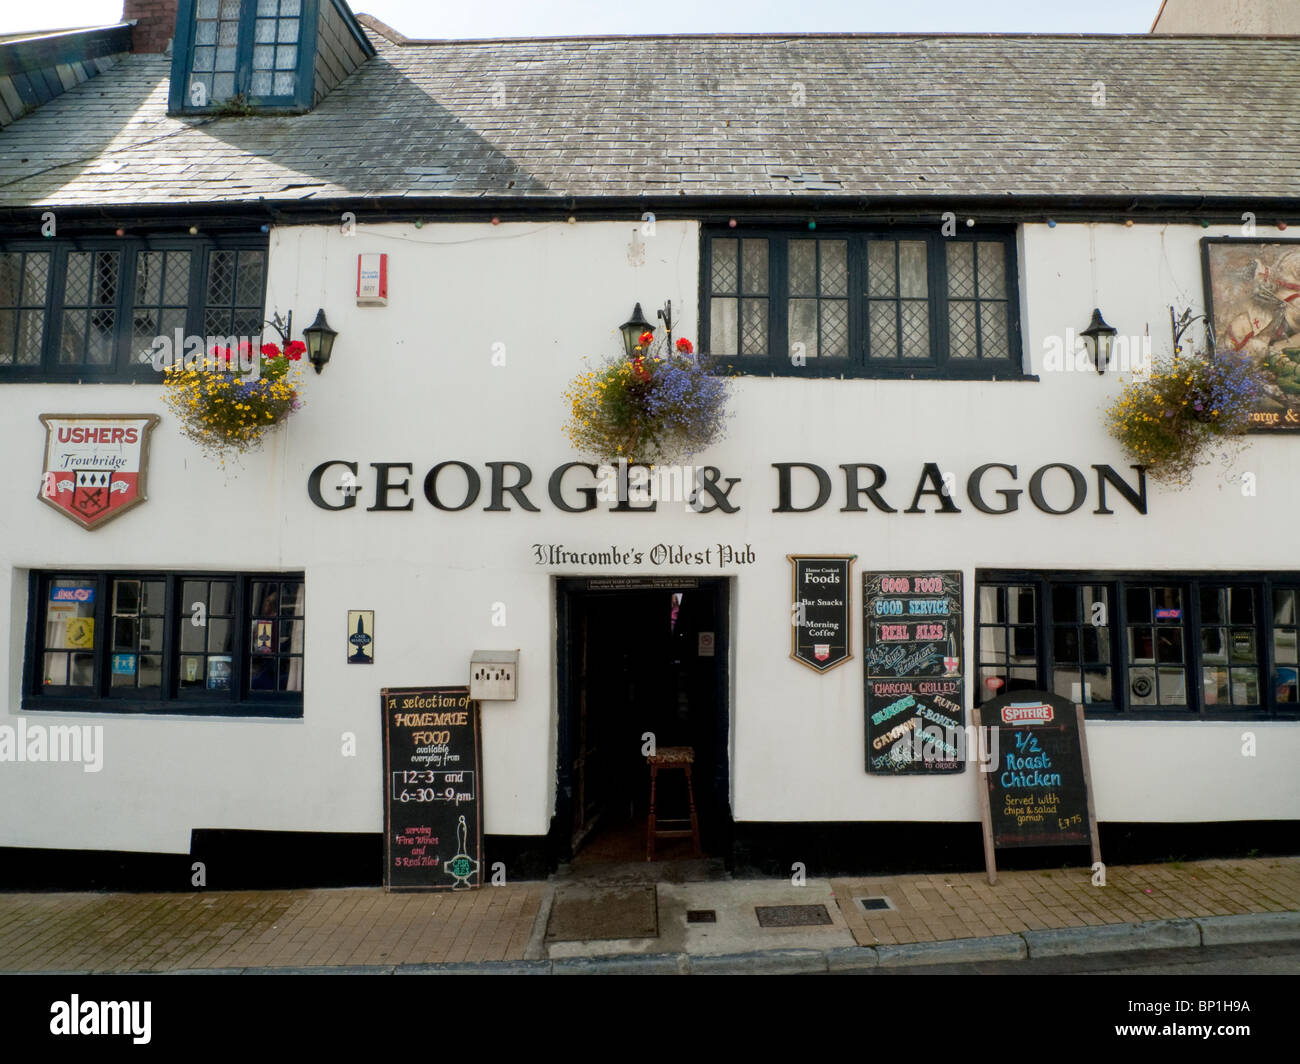 Le George & Dragon. Ilfracombe. Banque D'Images